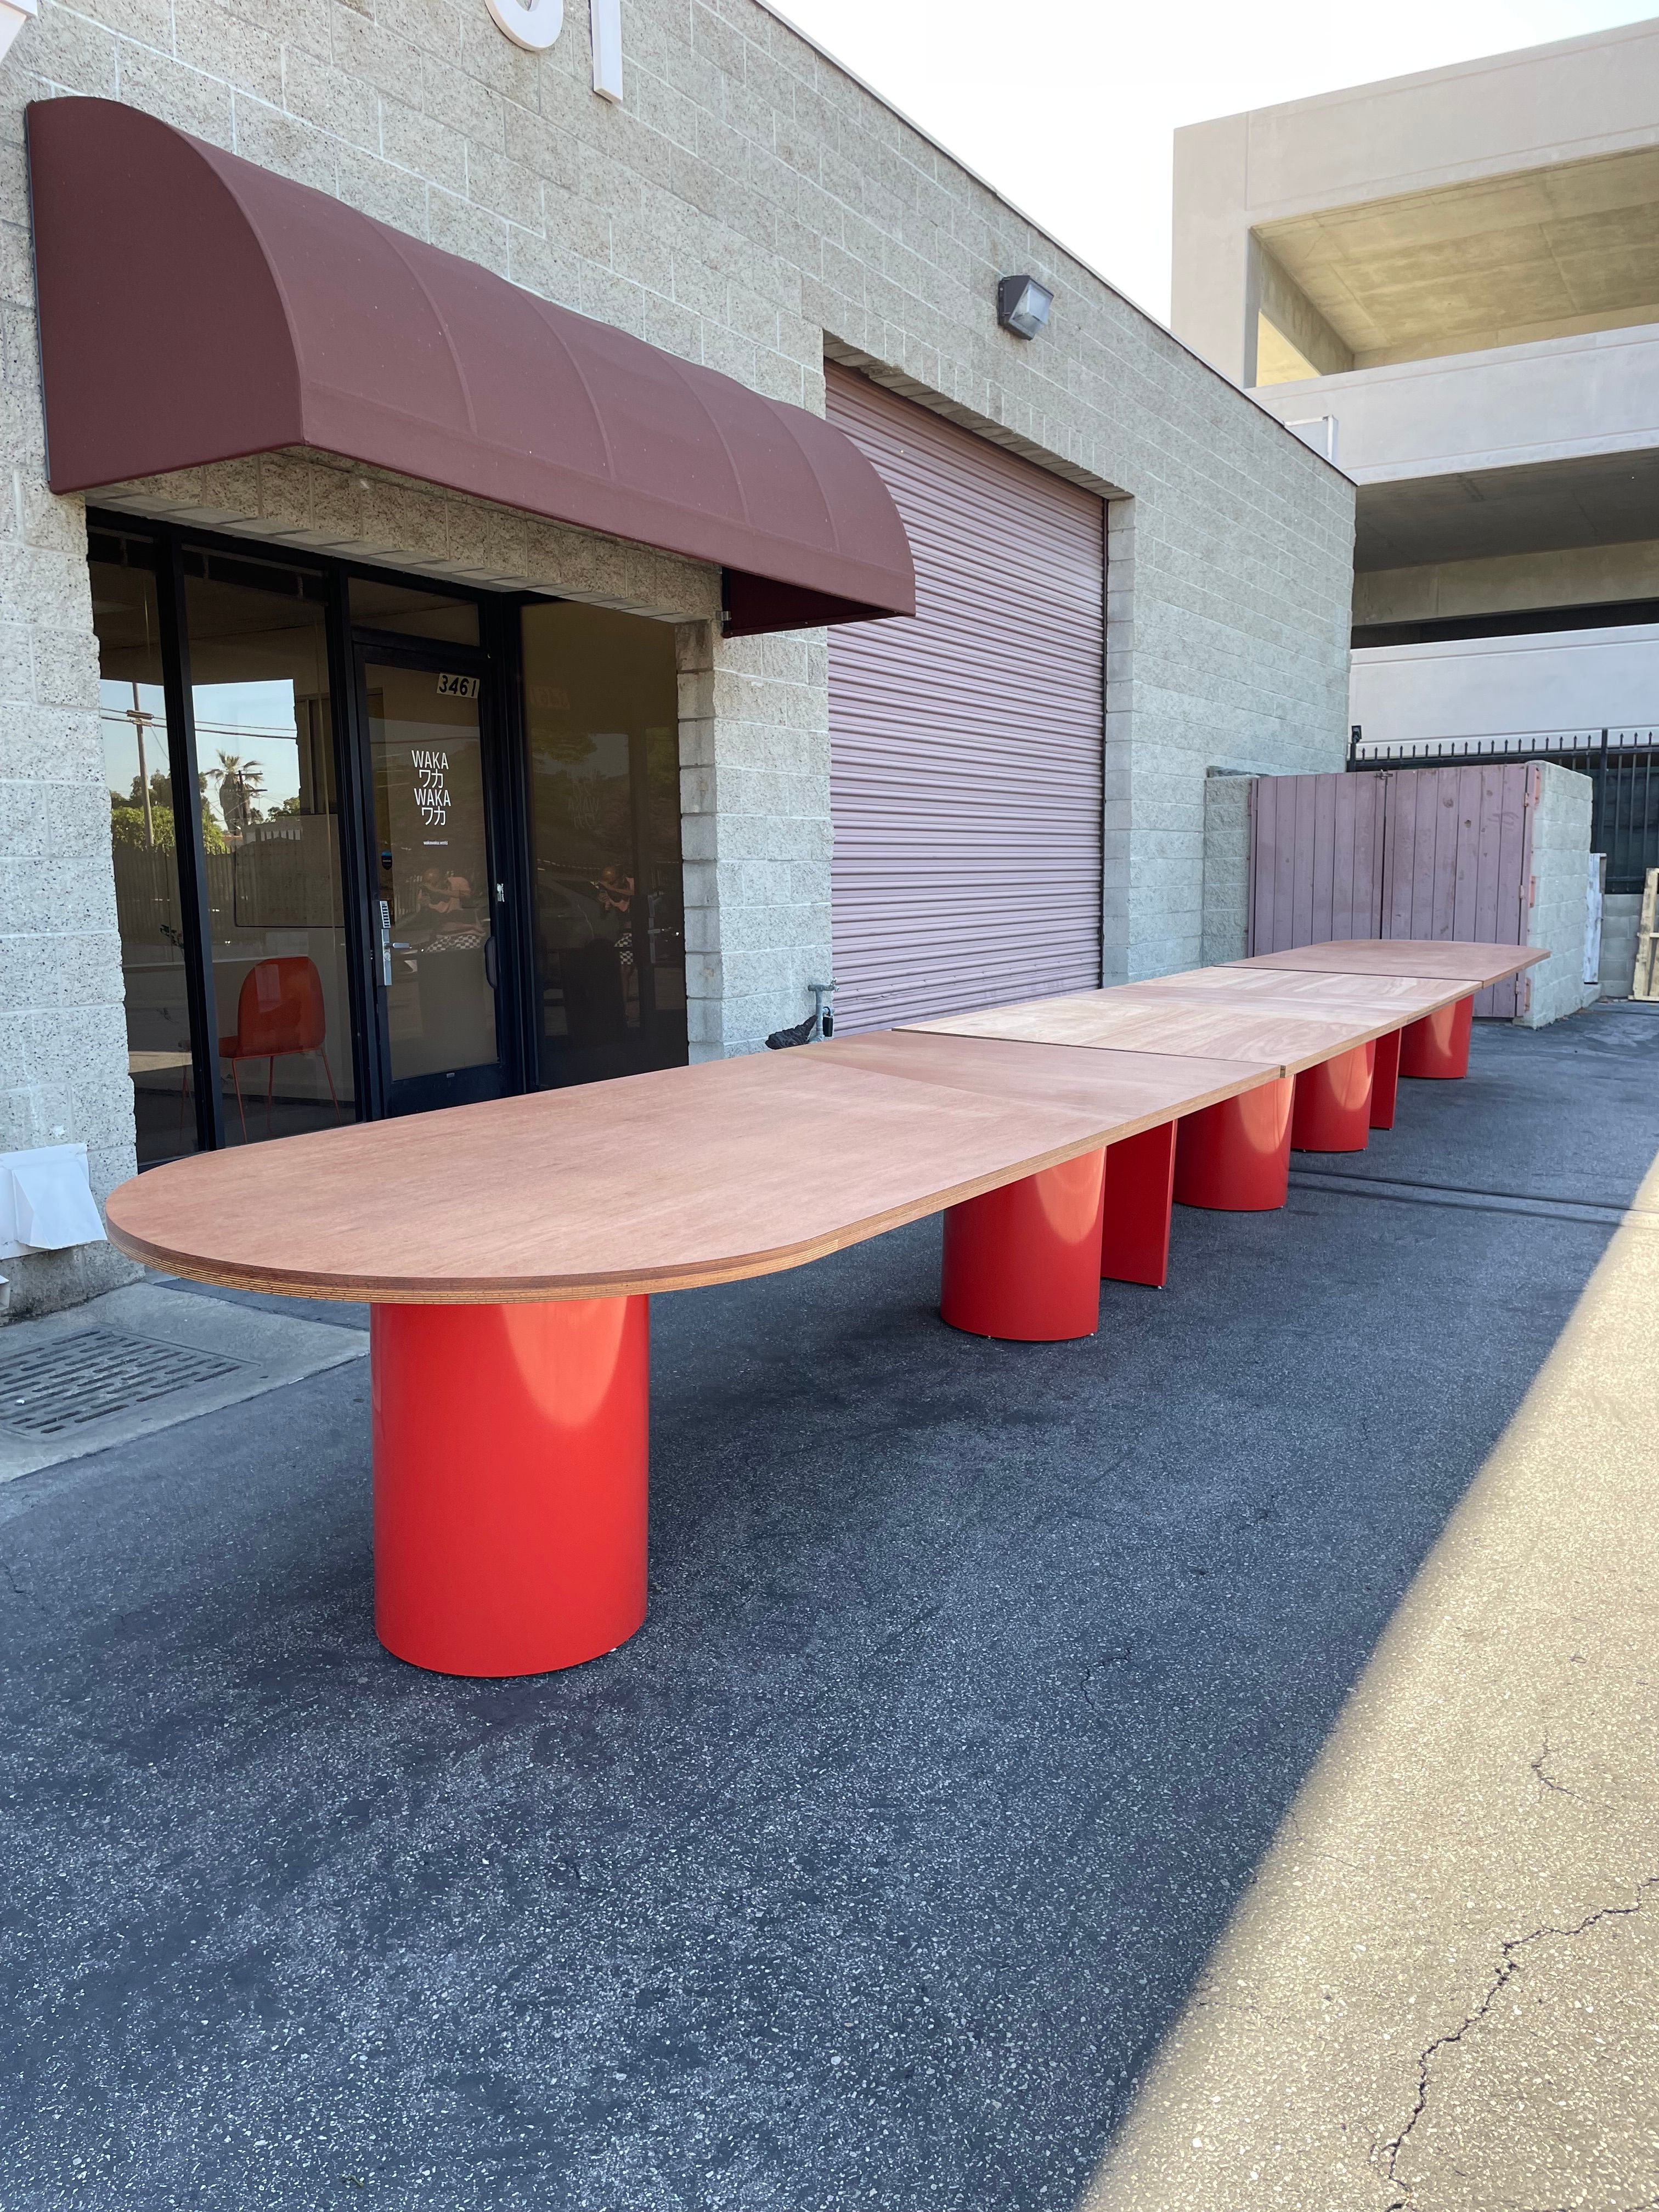  Outdoor Community Tables product image 1